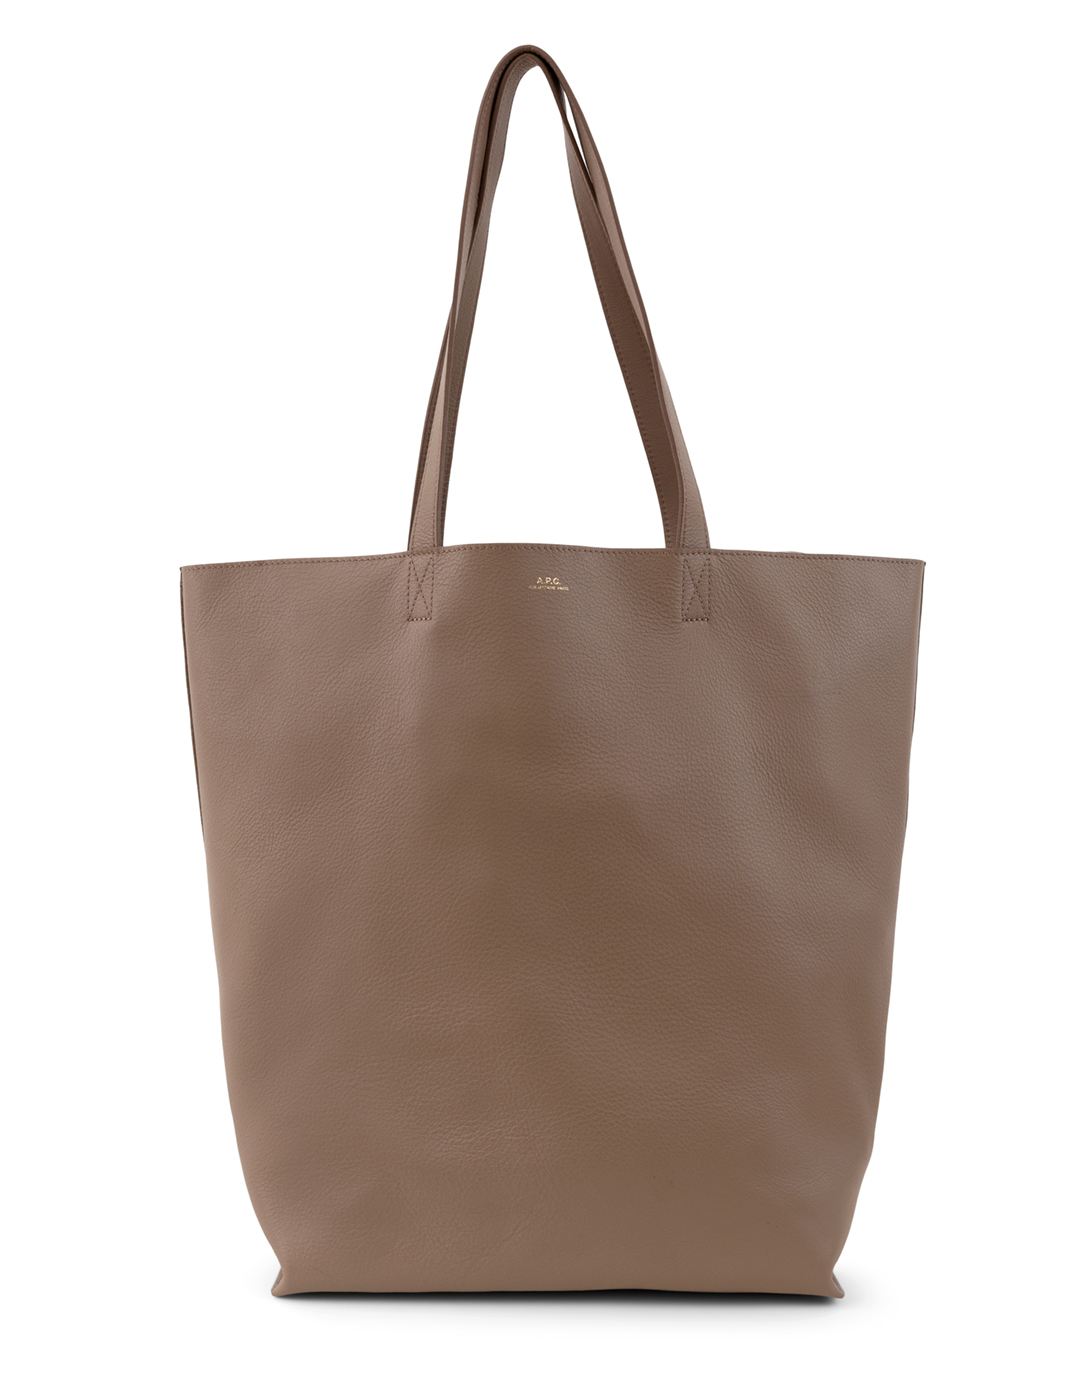 Maiko Taupe Leather Tote Bag | A.P.C.